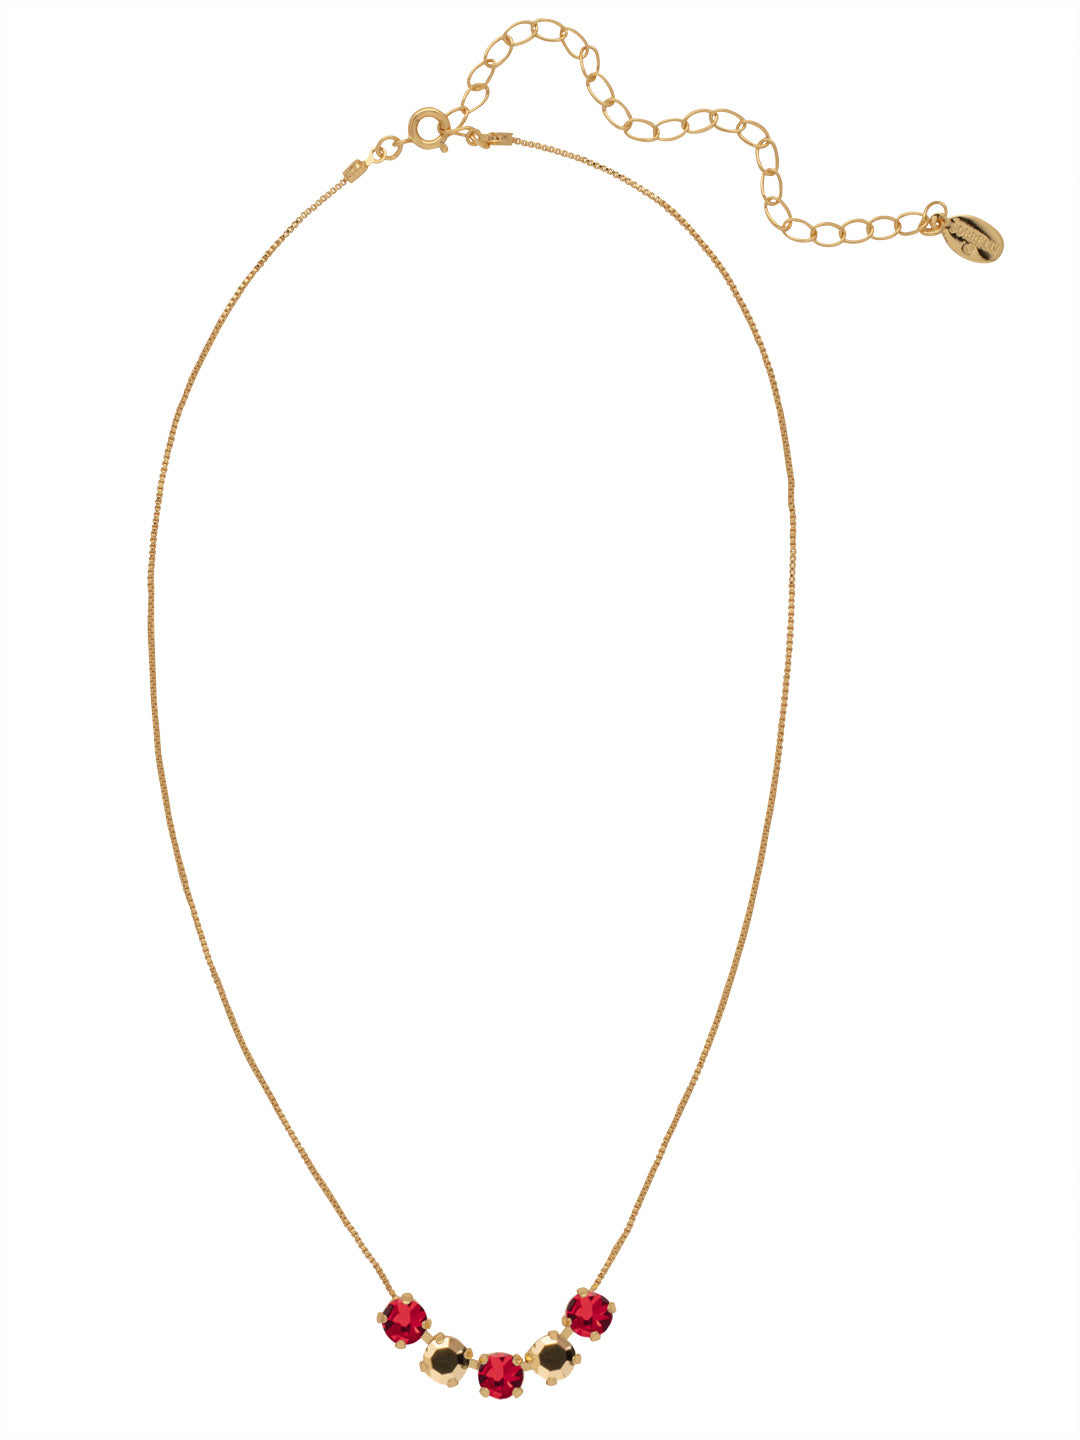 Shaughna Tennis Necklace - NFC84BGGGA - <p>The Shaughna Tennis Necklace features five crystals on a delicate adjustable chain. From Sorrelli's Go Garnet collection in our Bright Gold-tone finish.</p>